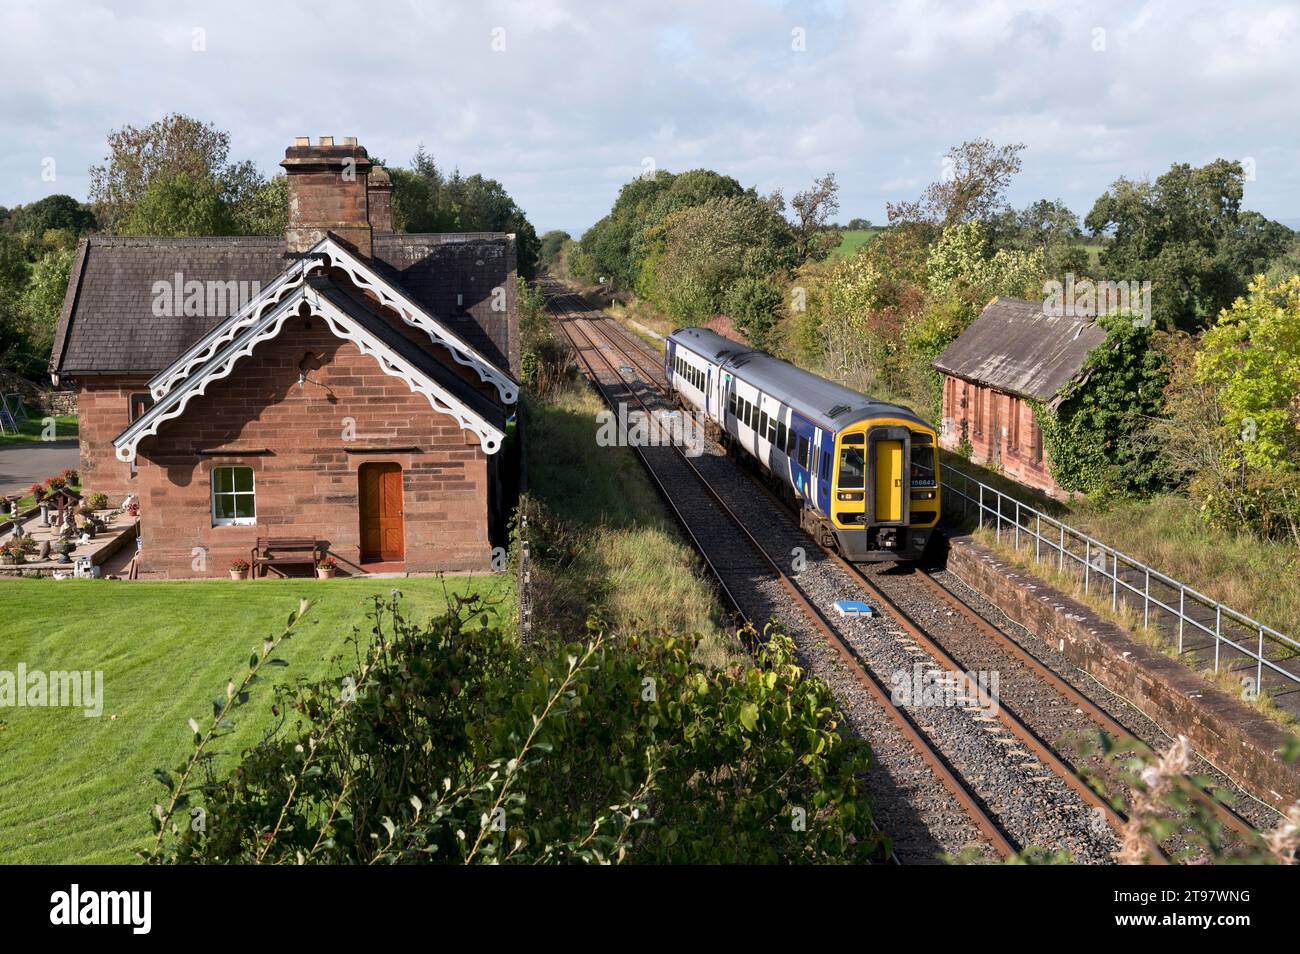 A Sprinter passenger train passes the former station of Cumwhinton, on the Settle-Carlisle railway near Carlisle, Cumbria. Now a private dwelling. Stock Photo